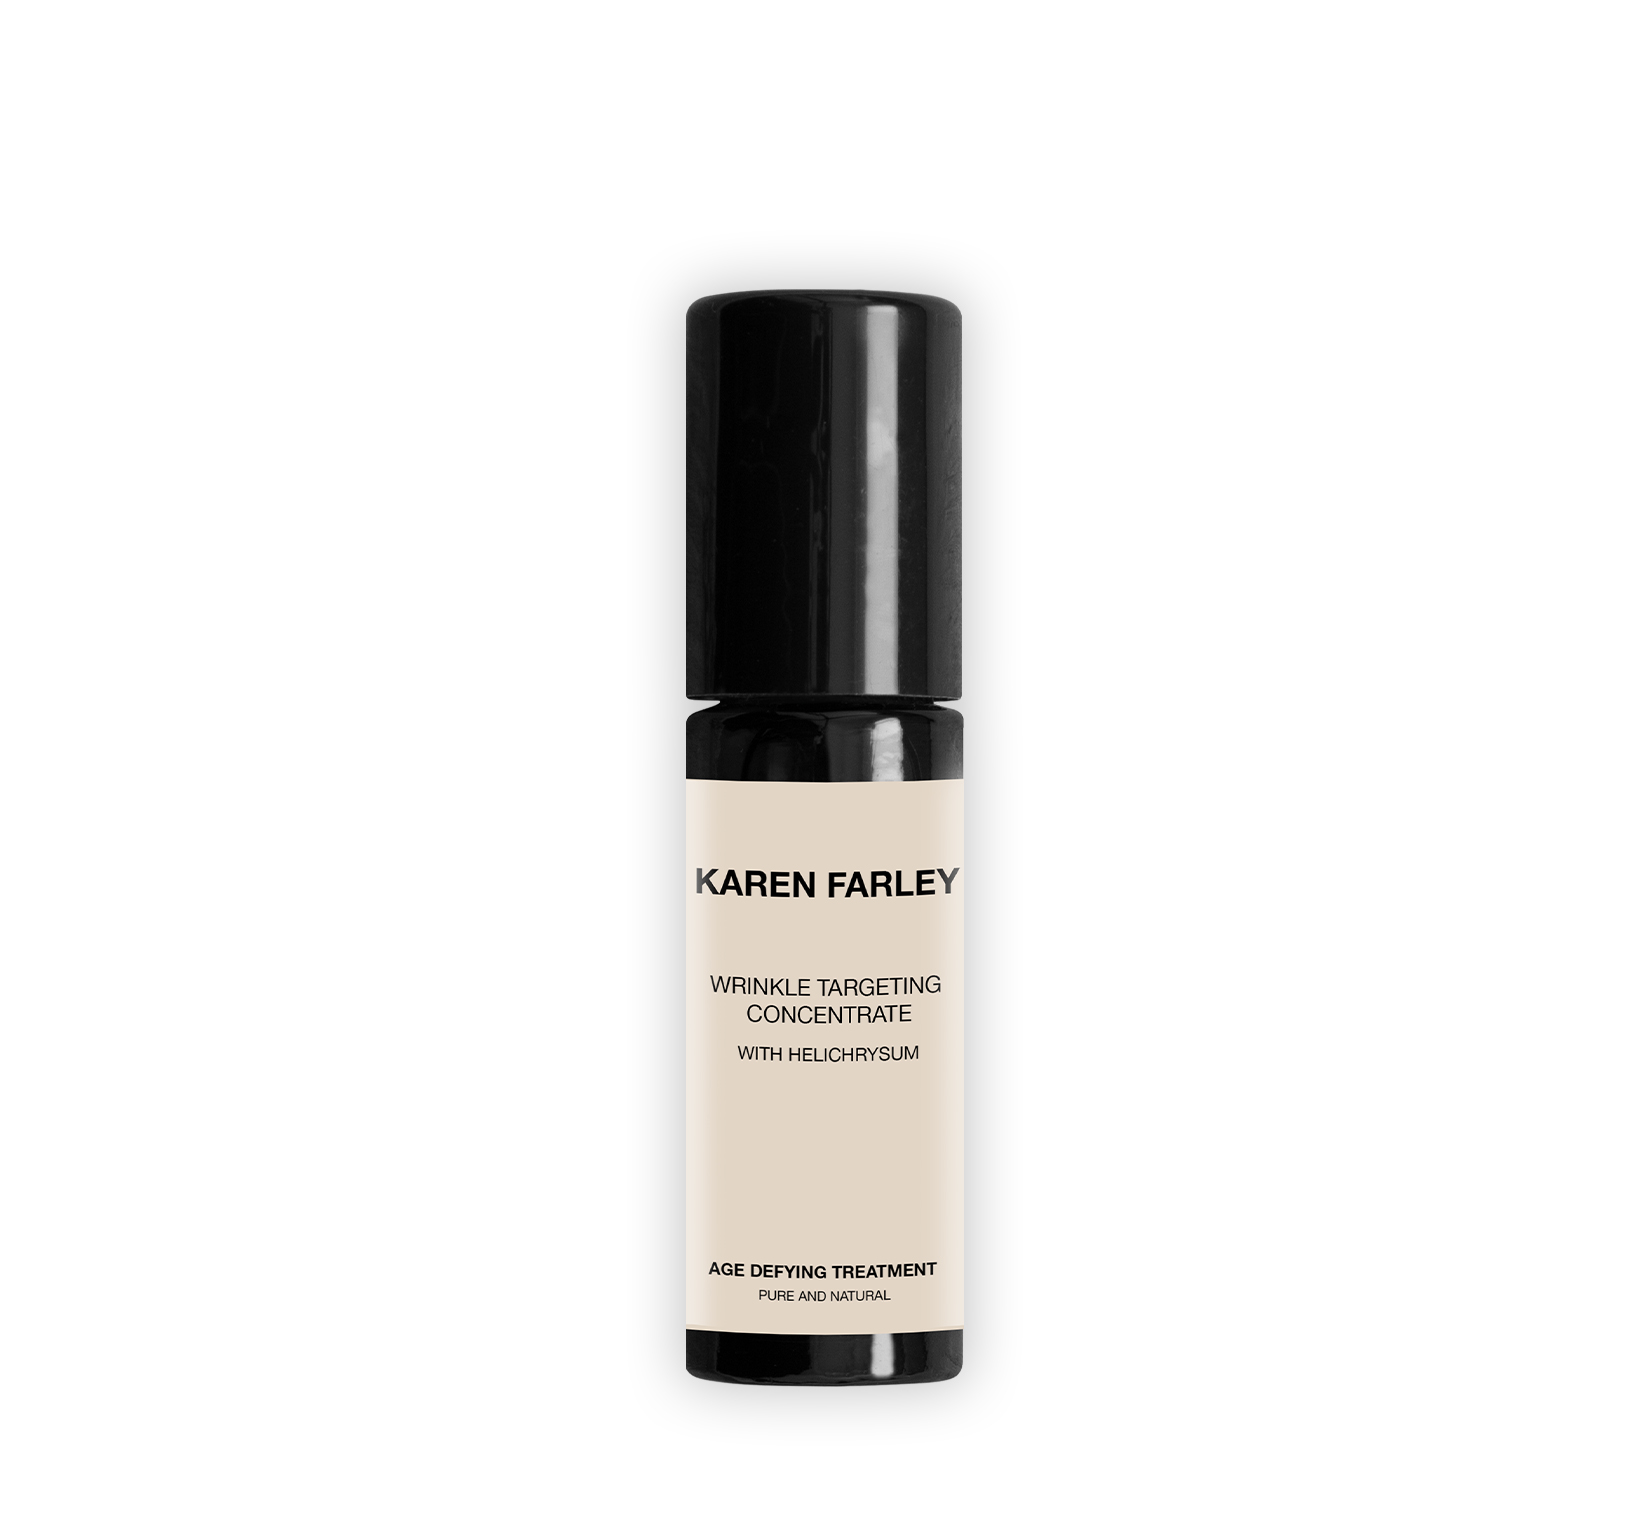 Wrinkle Targeting Concentrate